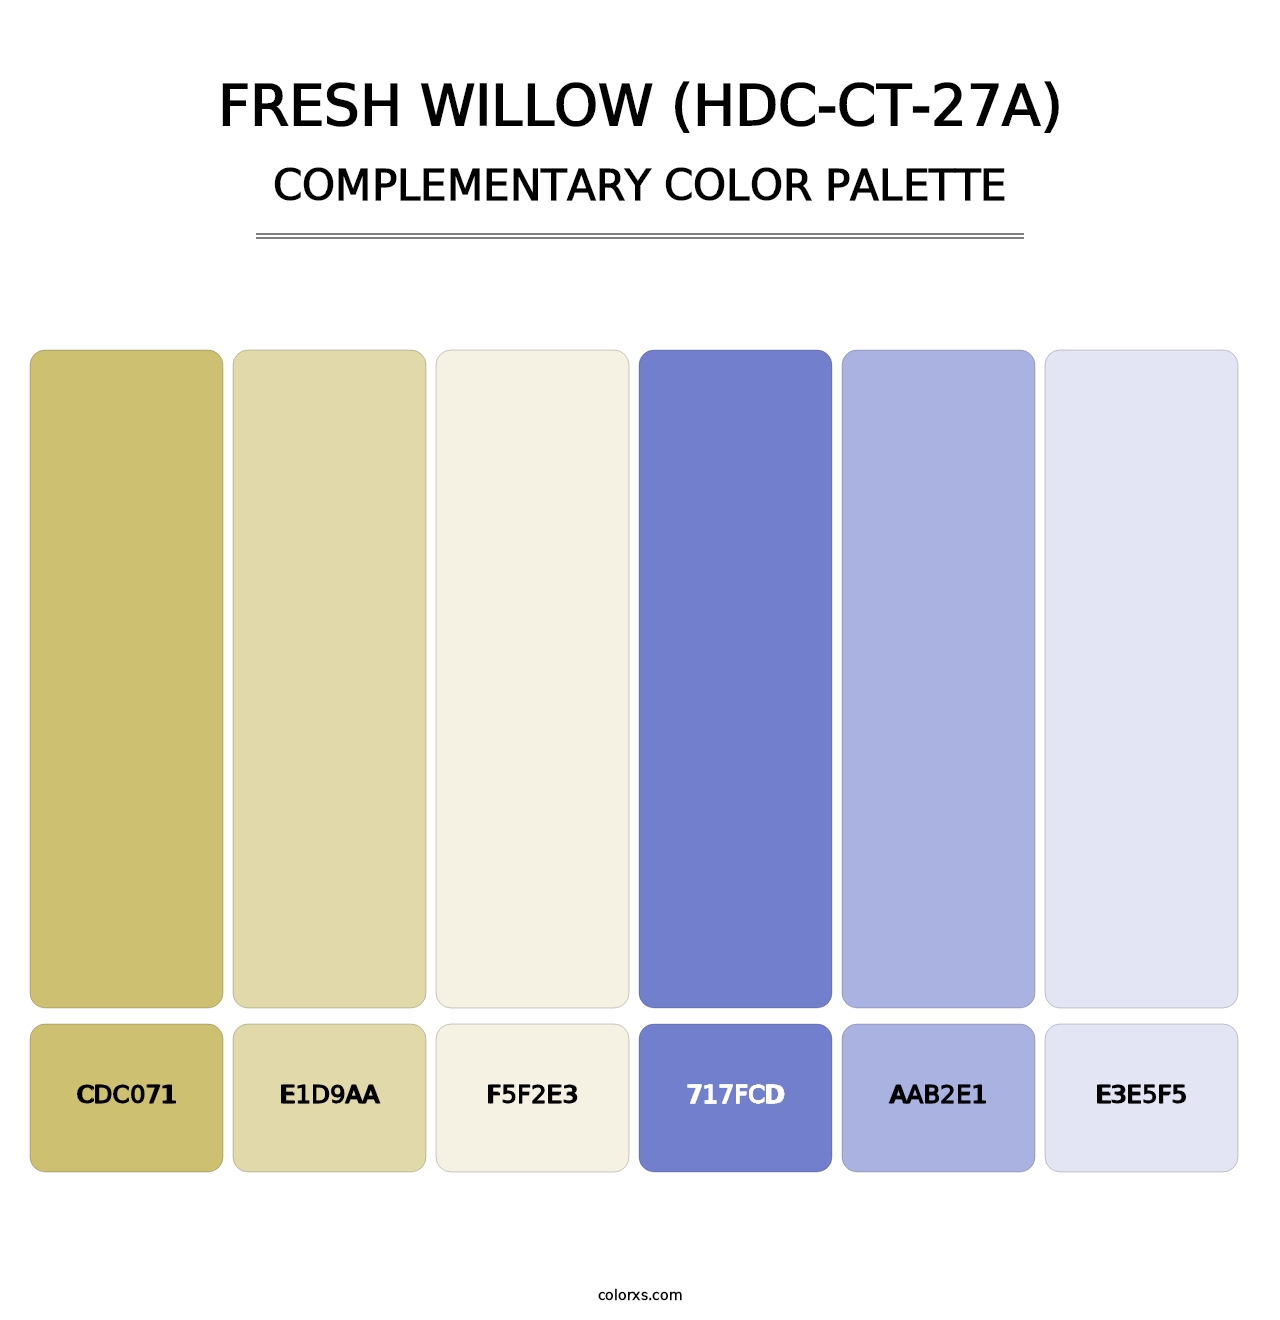 Fresh Willow (HDC-CT-27A) - Complementary Color Palette